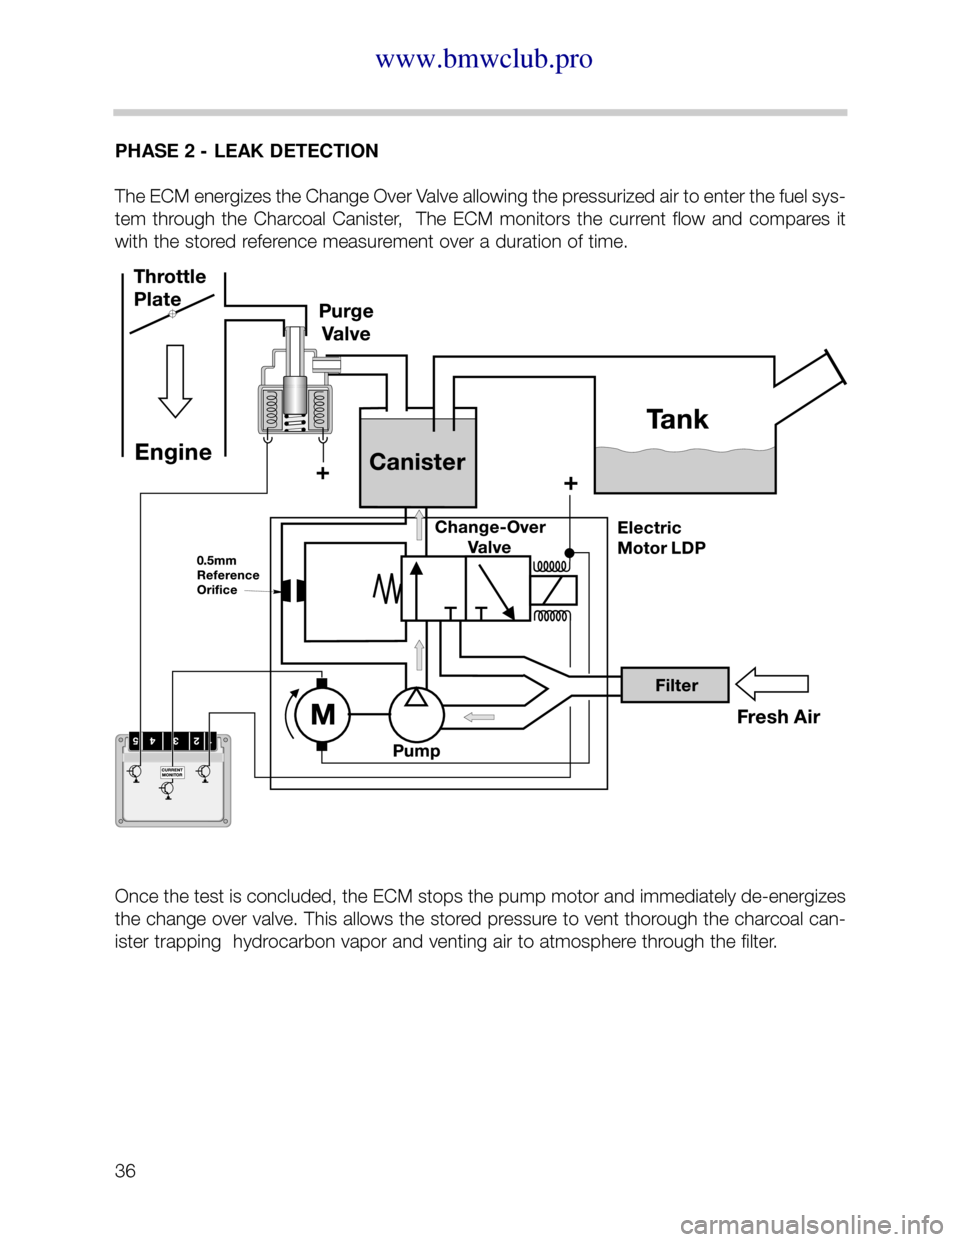 BMW 540i 1999 E39 M62TU Engine Workshop Manual PHASE 2 - LEAK DETECTION

The ECM energizes the Change Over Valve allowing the pressurized air to enter the fuel sys-

tem  through  the  Charcoal  Canister,    The  ECM  monitors  the  current  flow 